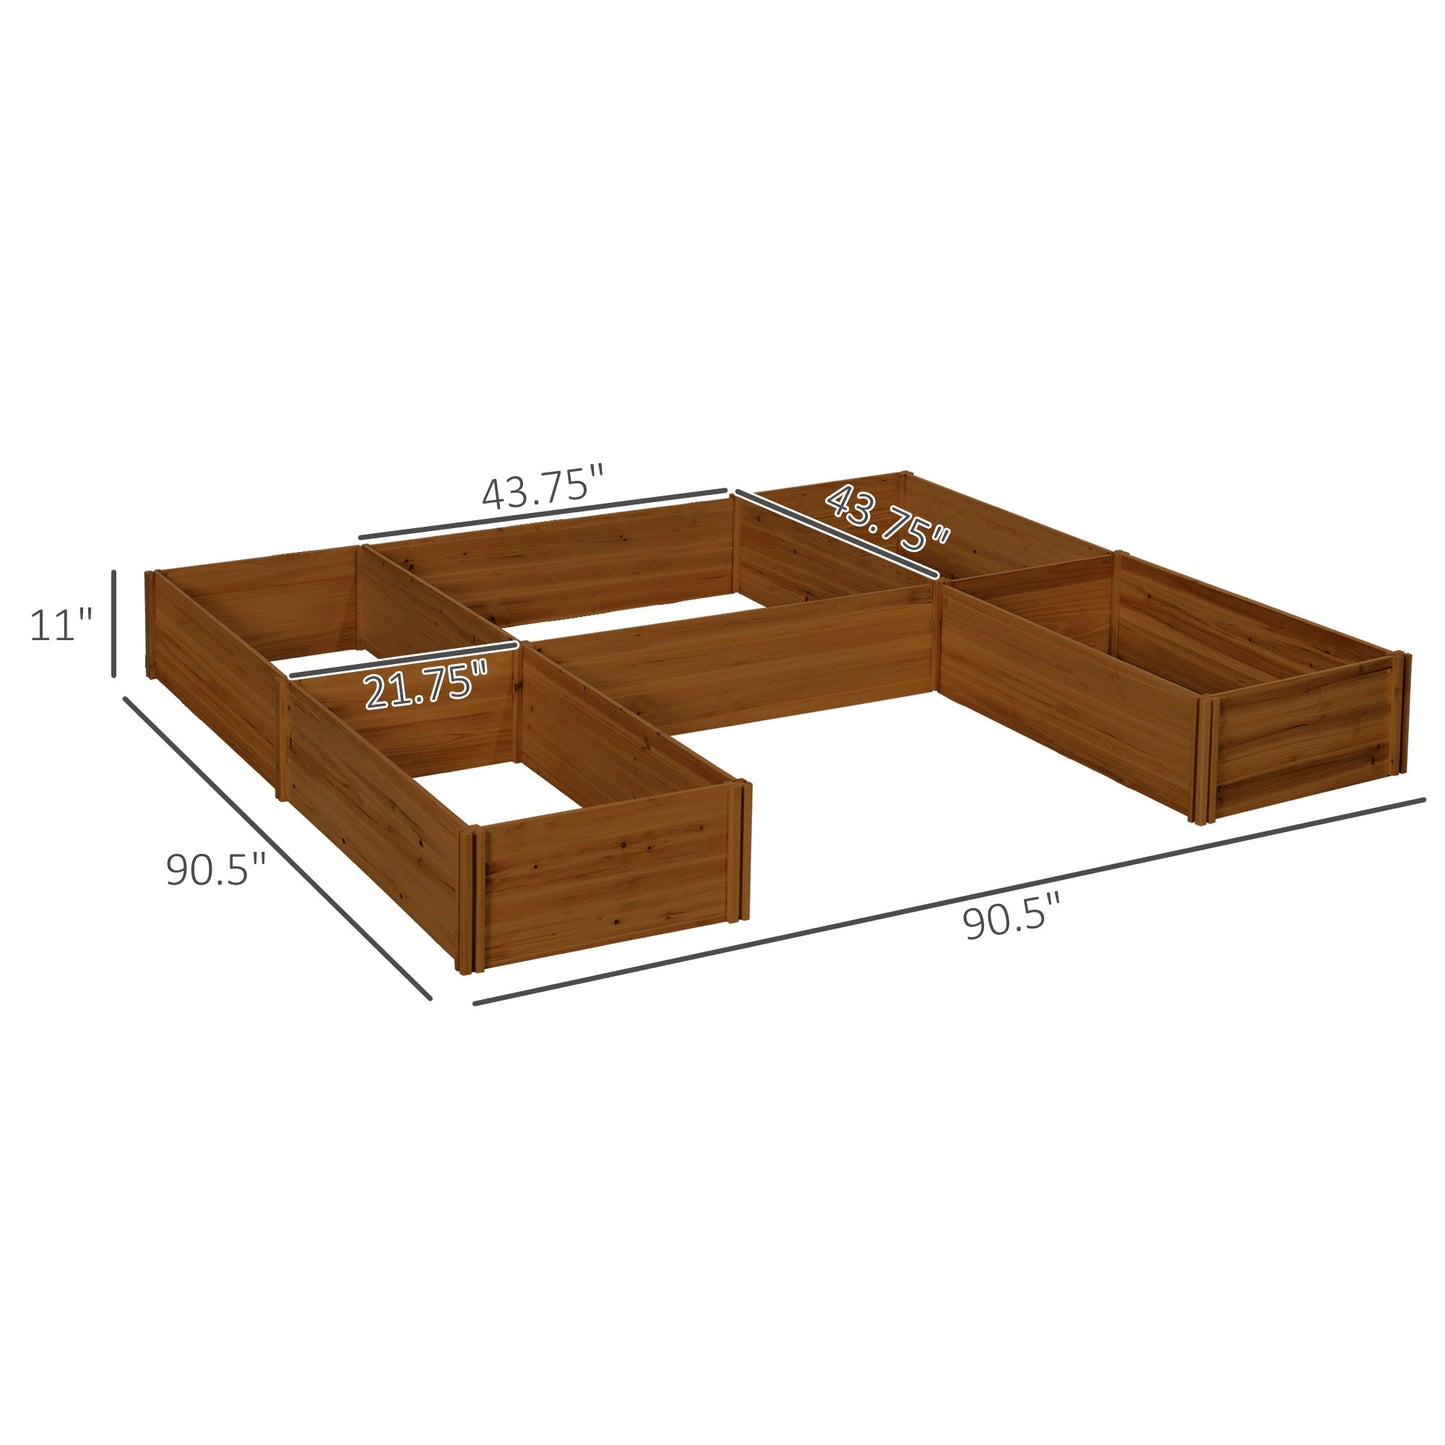 Outdoor and Garden-Raised Garden Bed, Set of 5 Large Wooden Box Planters for Outdoor Plants Vegetables Flowers Herbs, 7.5x7.5x1ft, Brown - Outdoor Style Company